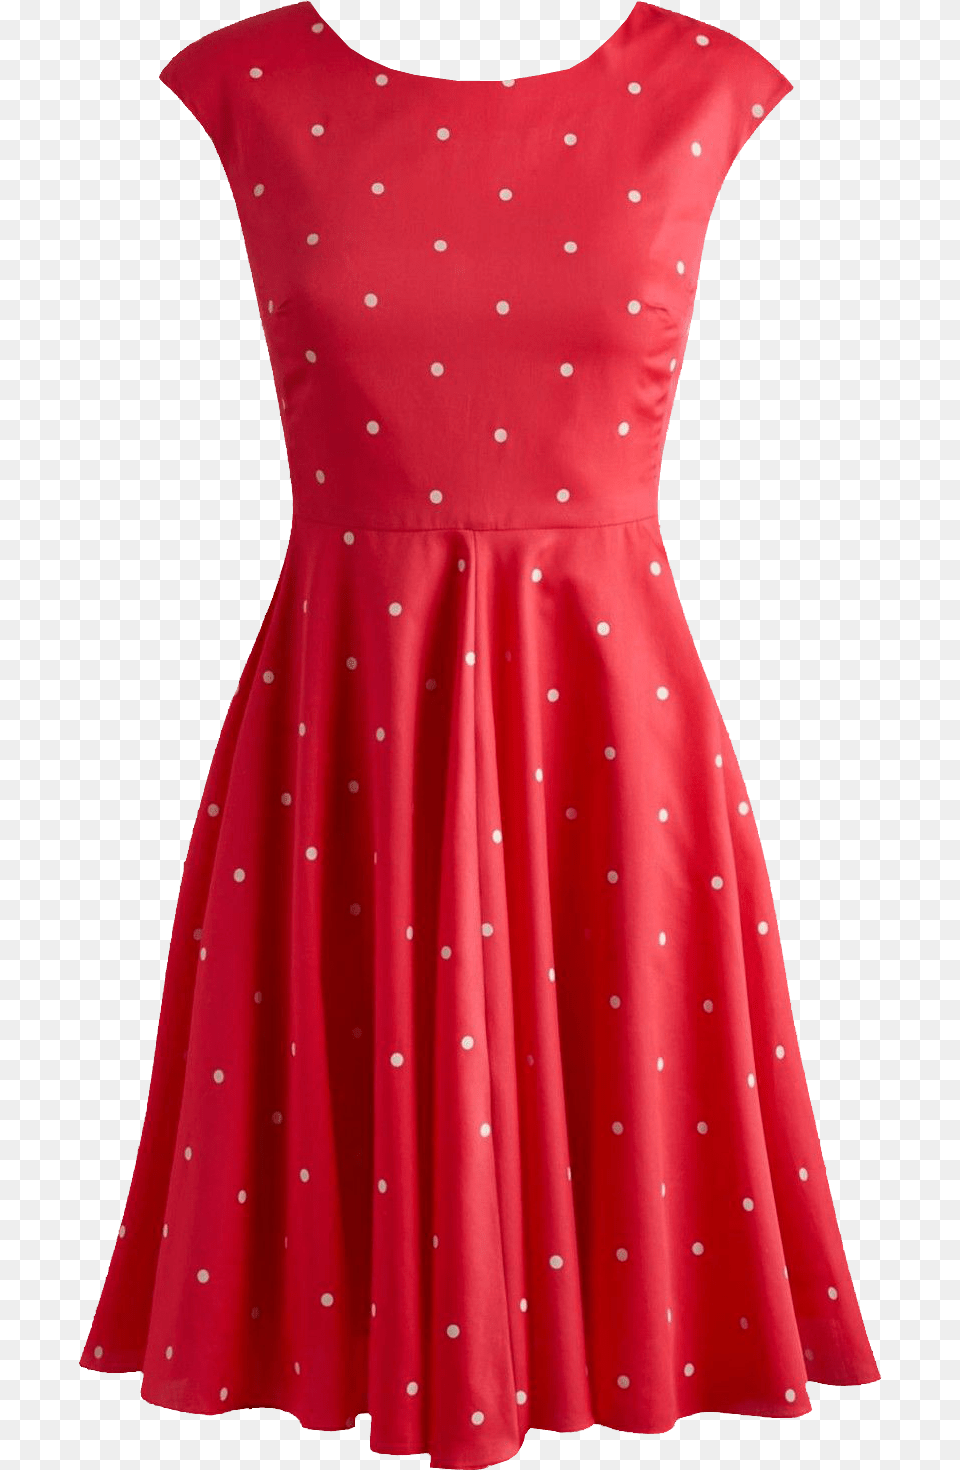 Clothing Image File Transparent Background Cloth, Dress, Pattern, Person, Polka Dot Free Png